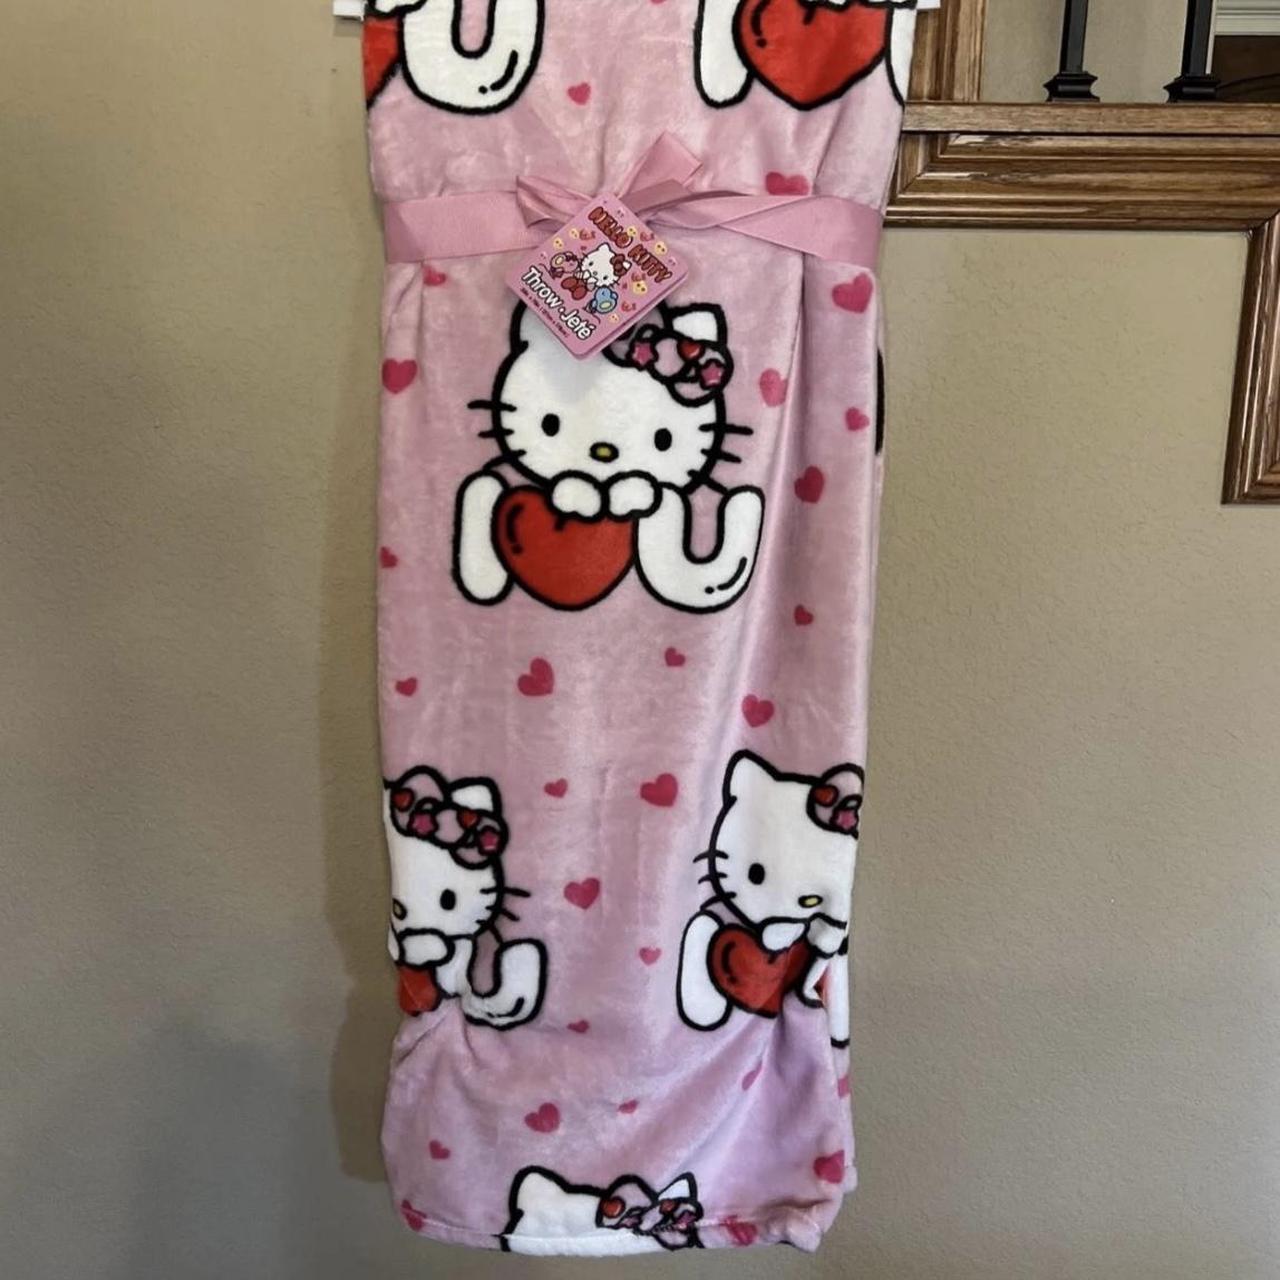 hello kitty throw blanket message before buying💗 - Depop